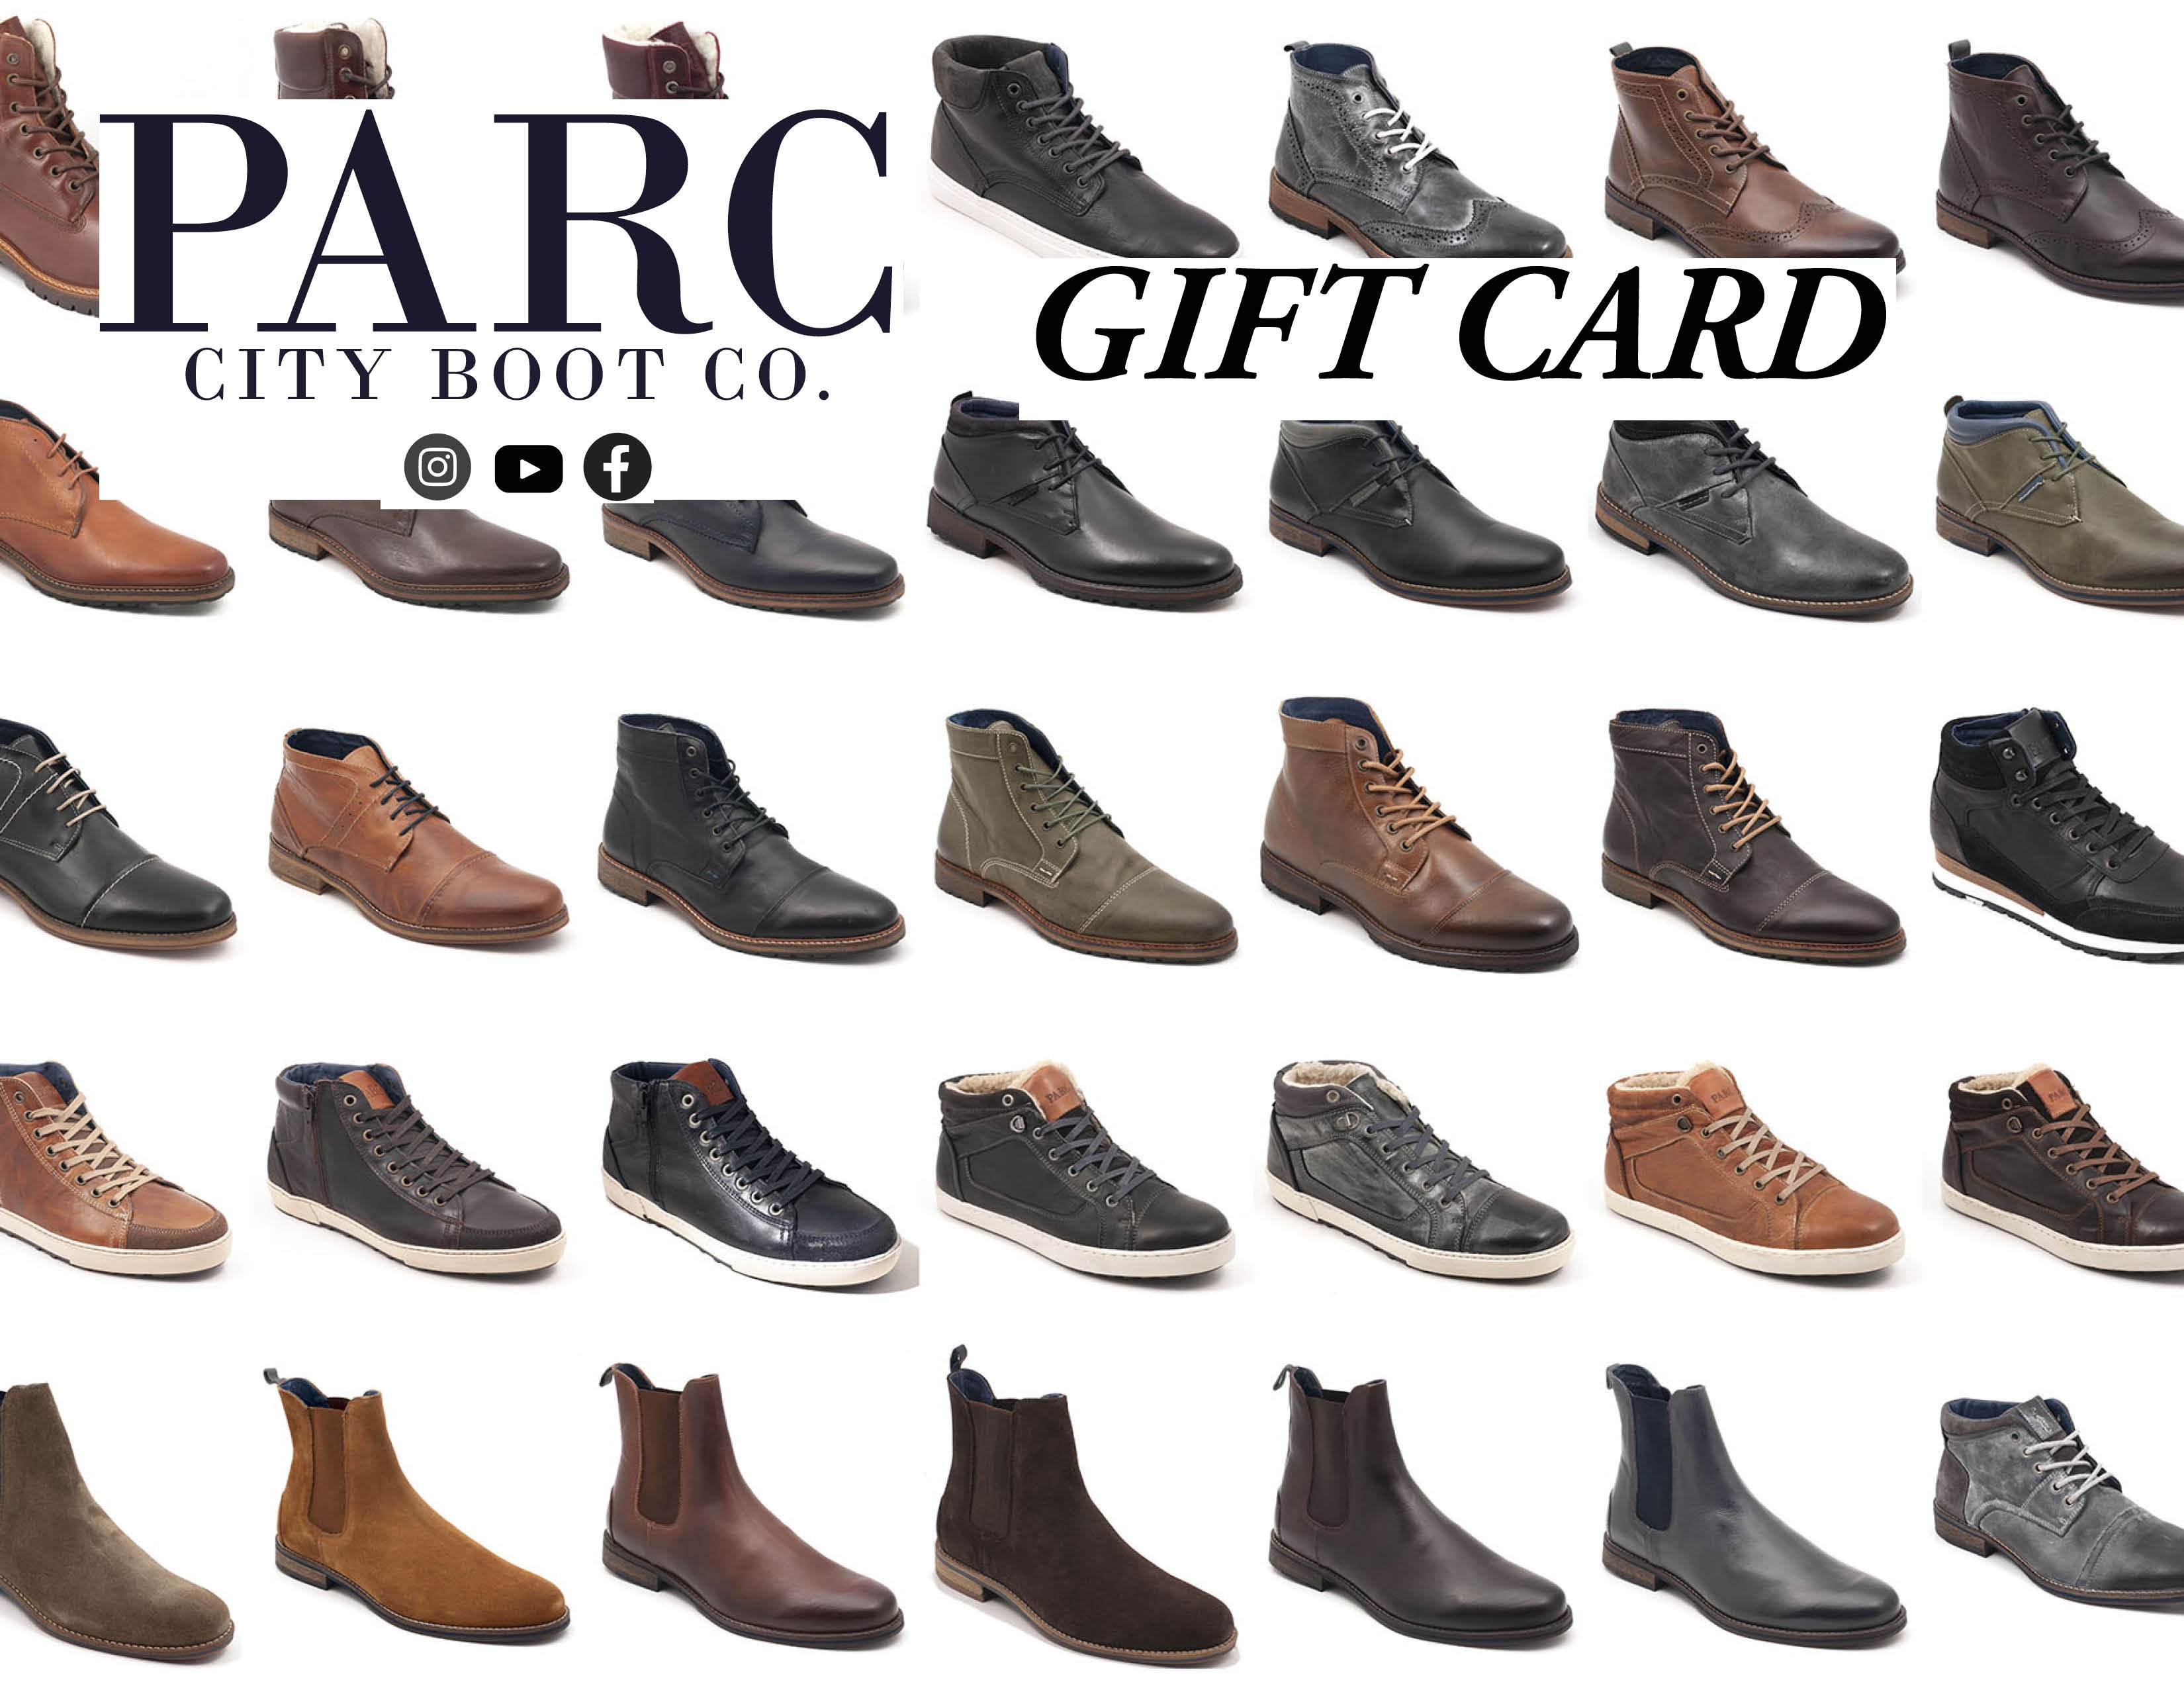 PARC City Boot Gift Card